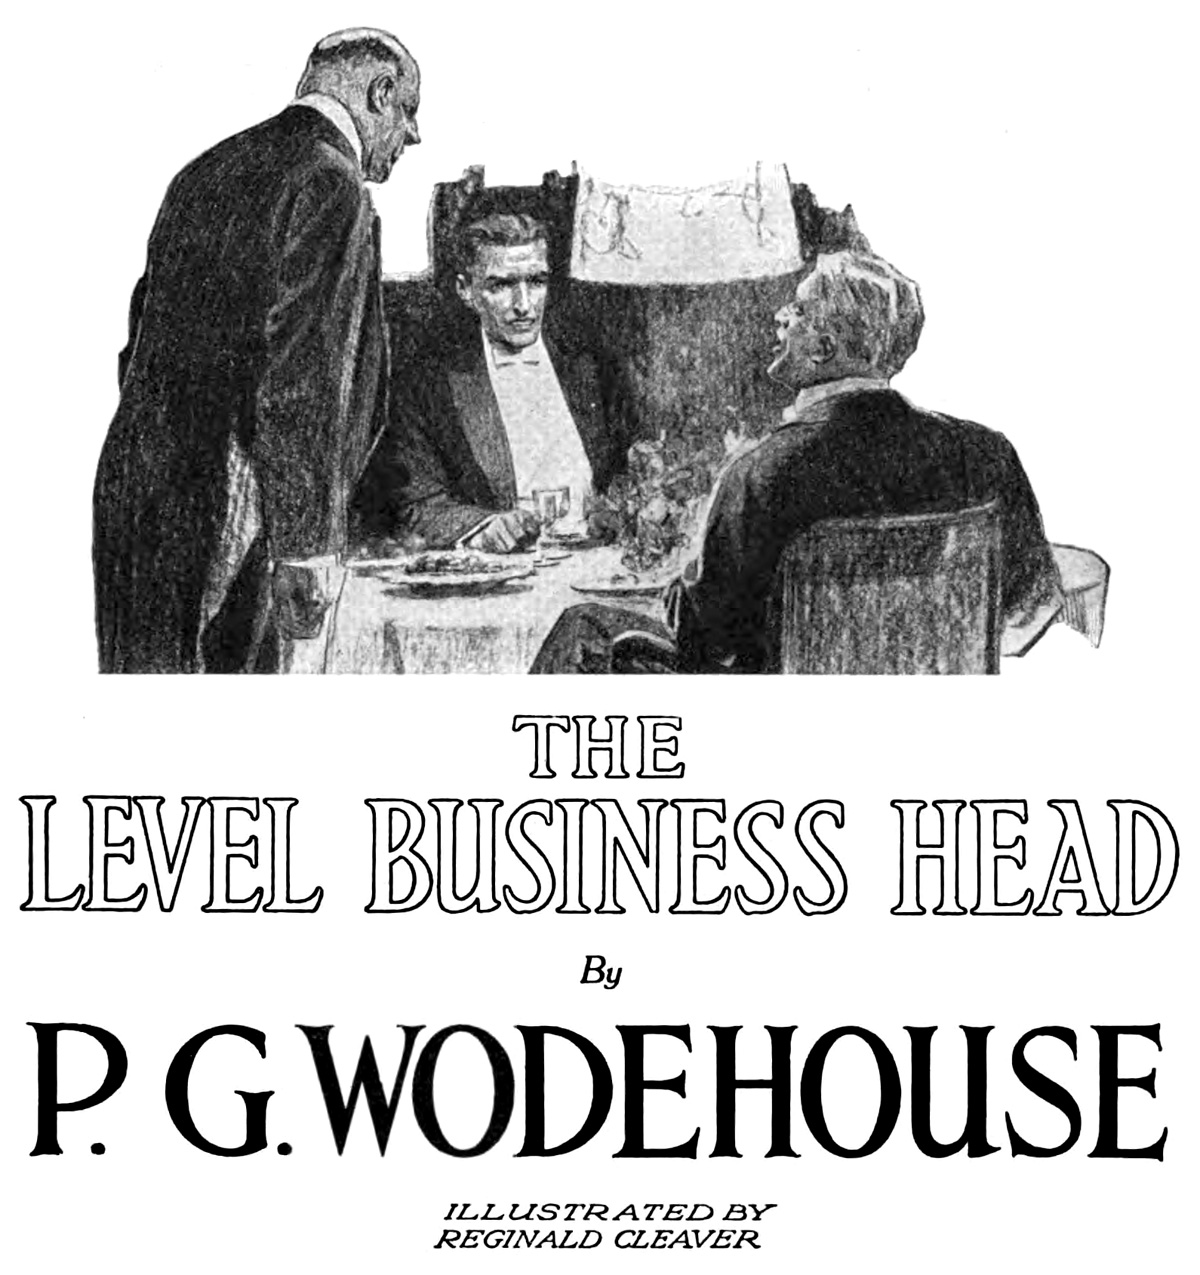 The Level Business Head, by P. G. Wodehouse